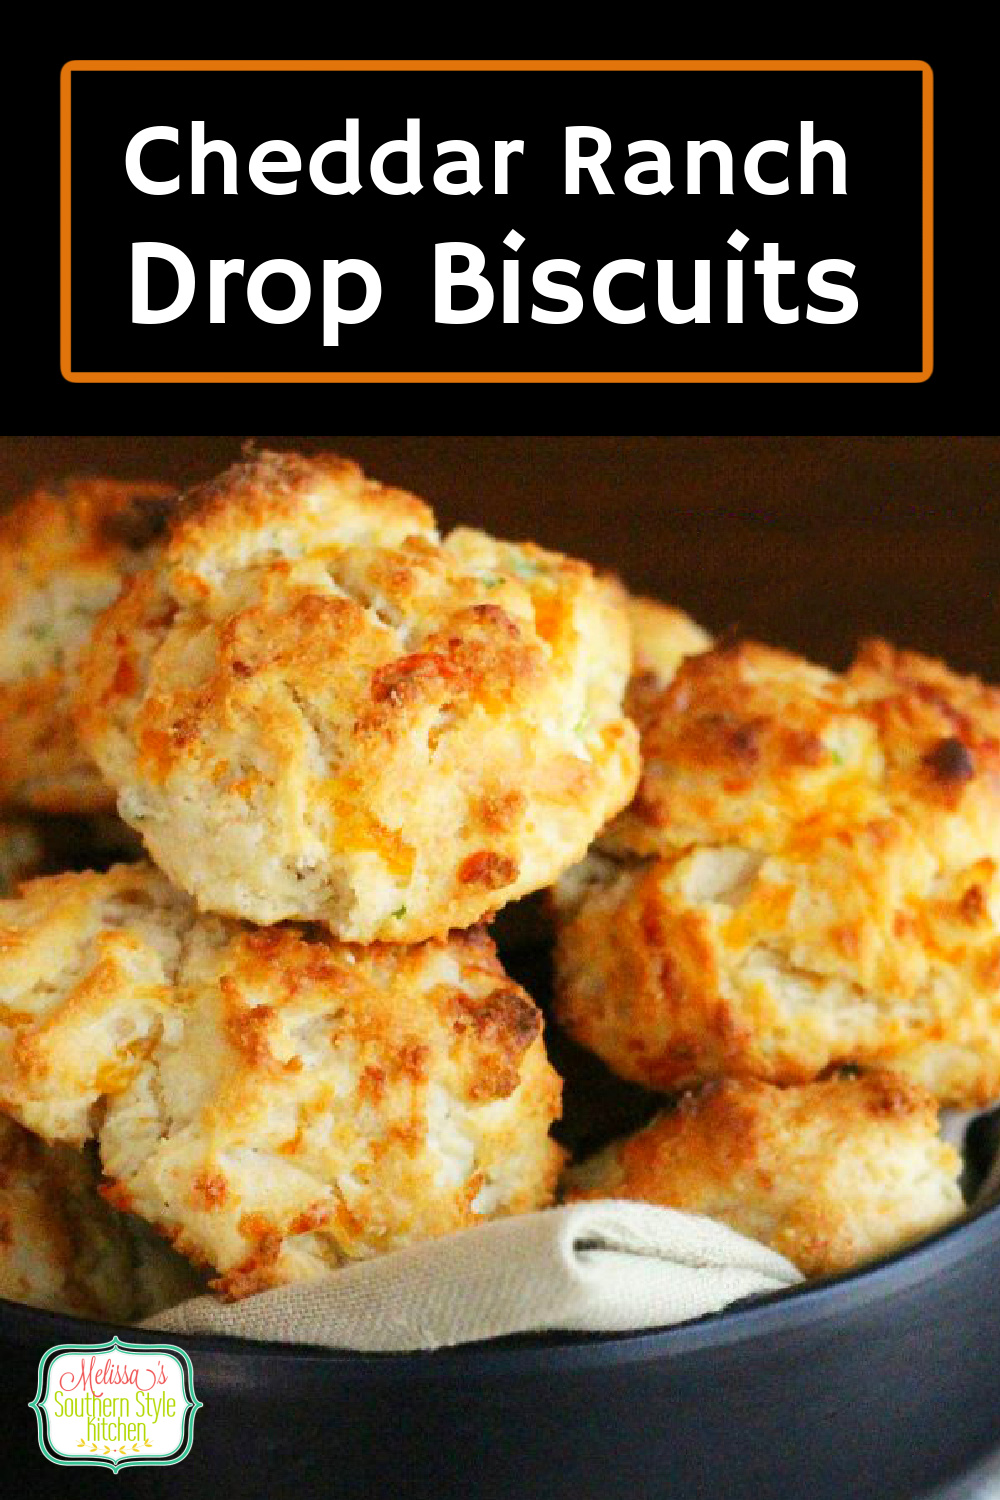 These cheddar-ranch infused drop biscuits require no rolling and cutting making them ideal for any meal #cheddarbiscuits #cheese #southernbiscuits #biscuitrecipes #dropbiscuits #cheddarranchdropbiscuits #brunch #breakfast #southernfood #southernrecipes #holidaybrunch via @melissasssk